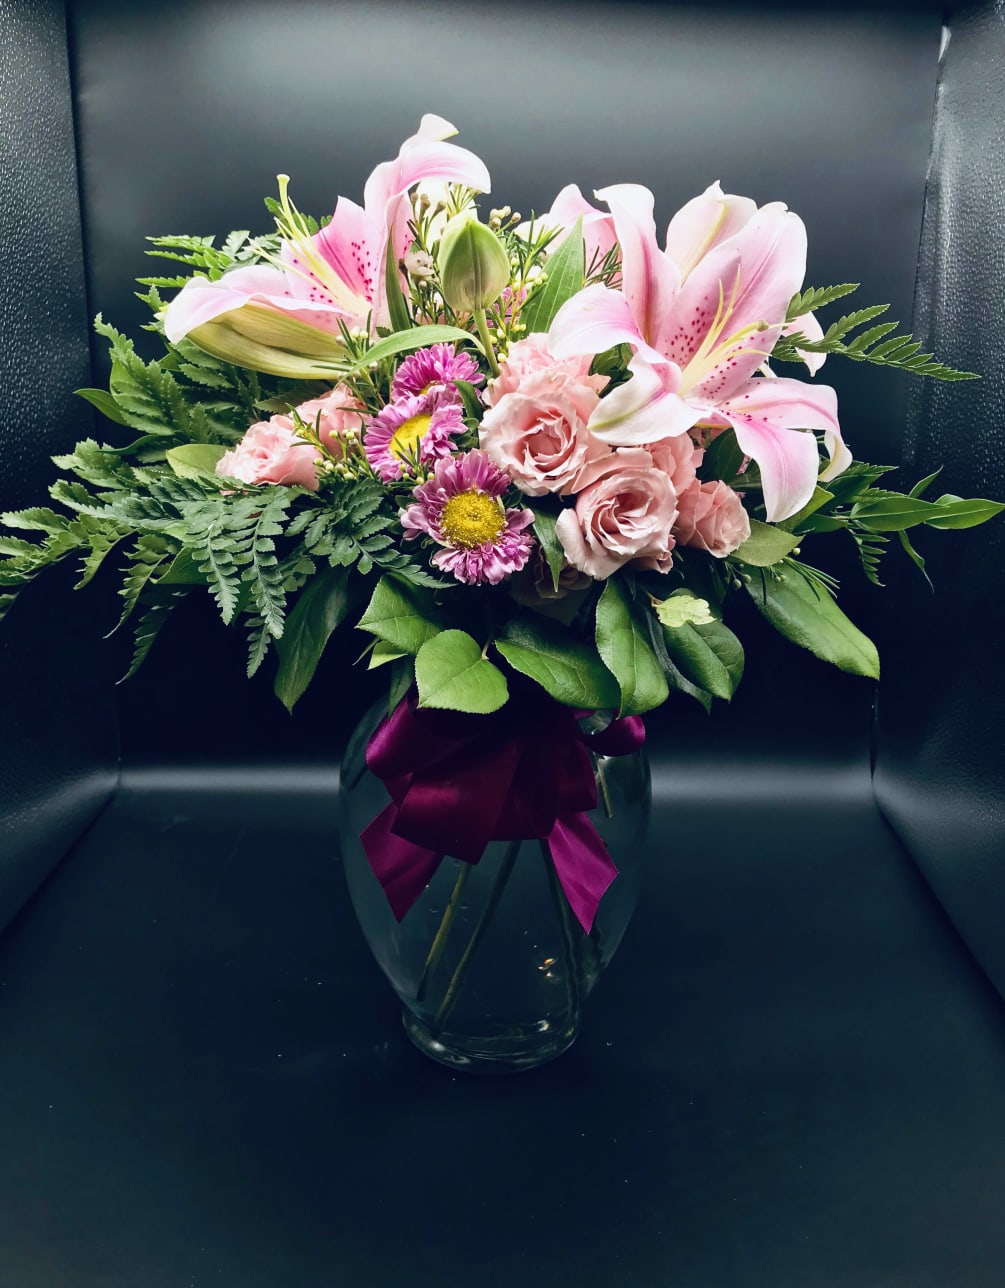 Different shades of pink flowers with lilies, roses, filler flowers and greenery.